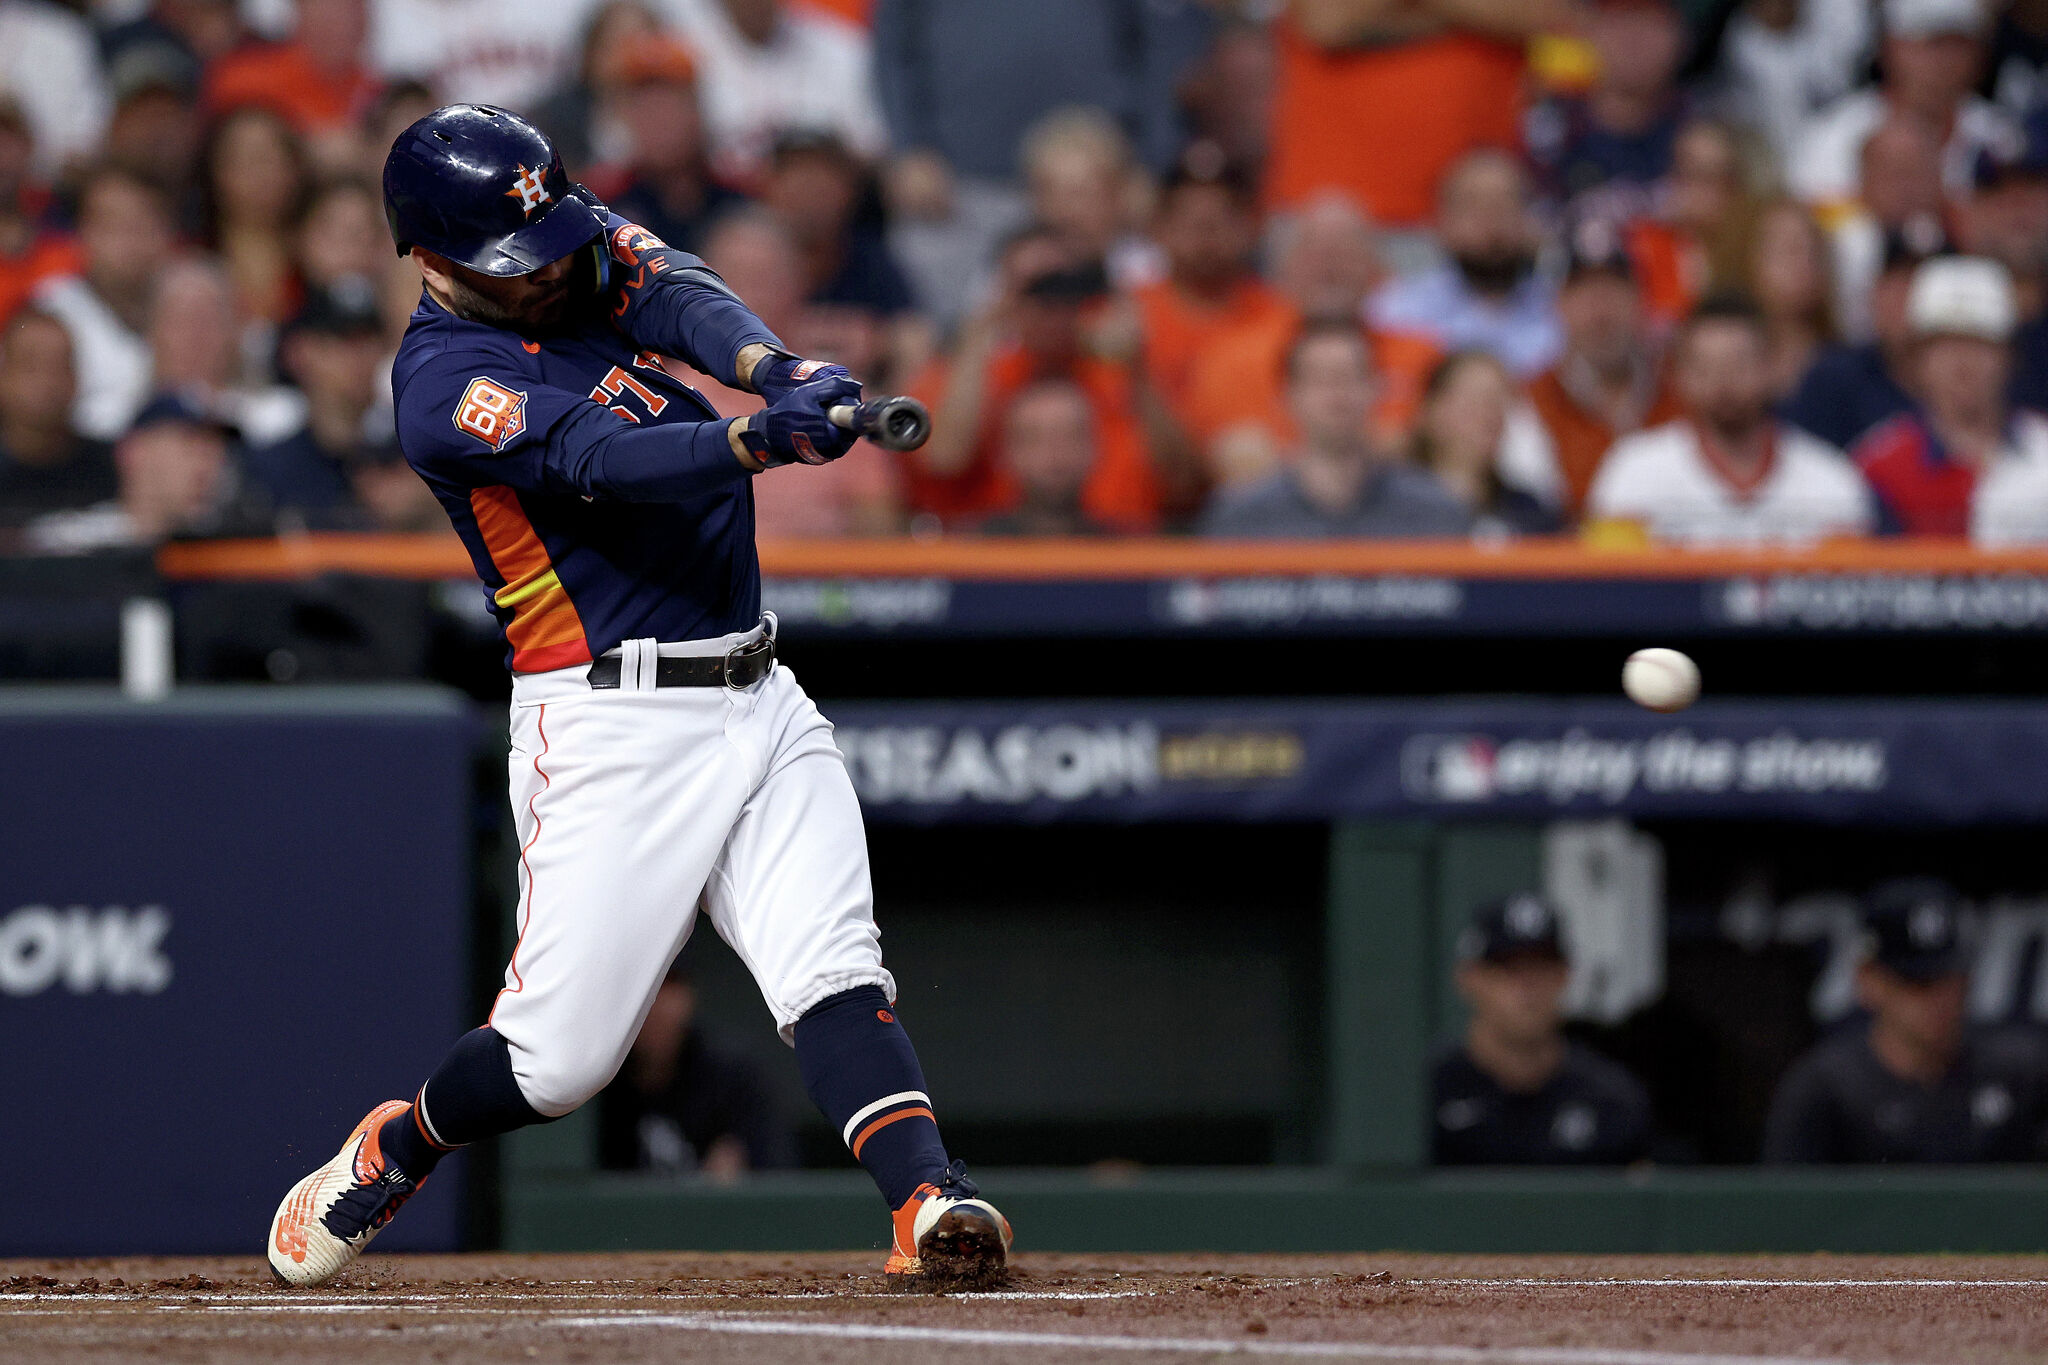 Astros vs. Yankees live updates: Bregman HR lifts Astros to win, 3-2